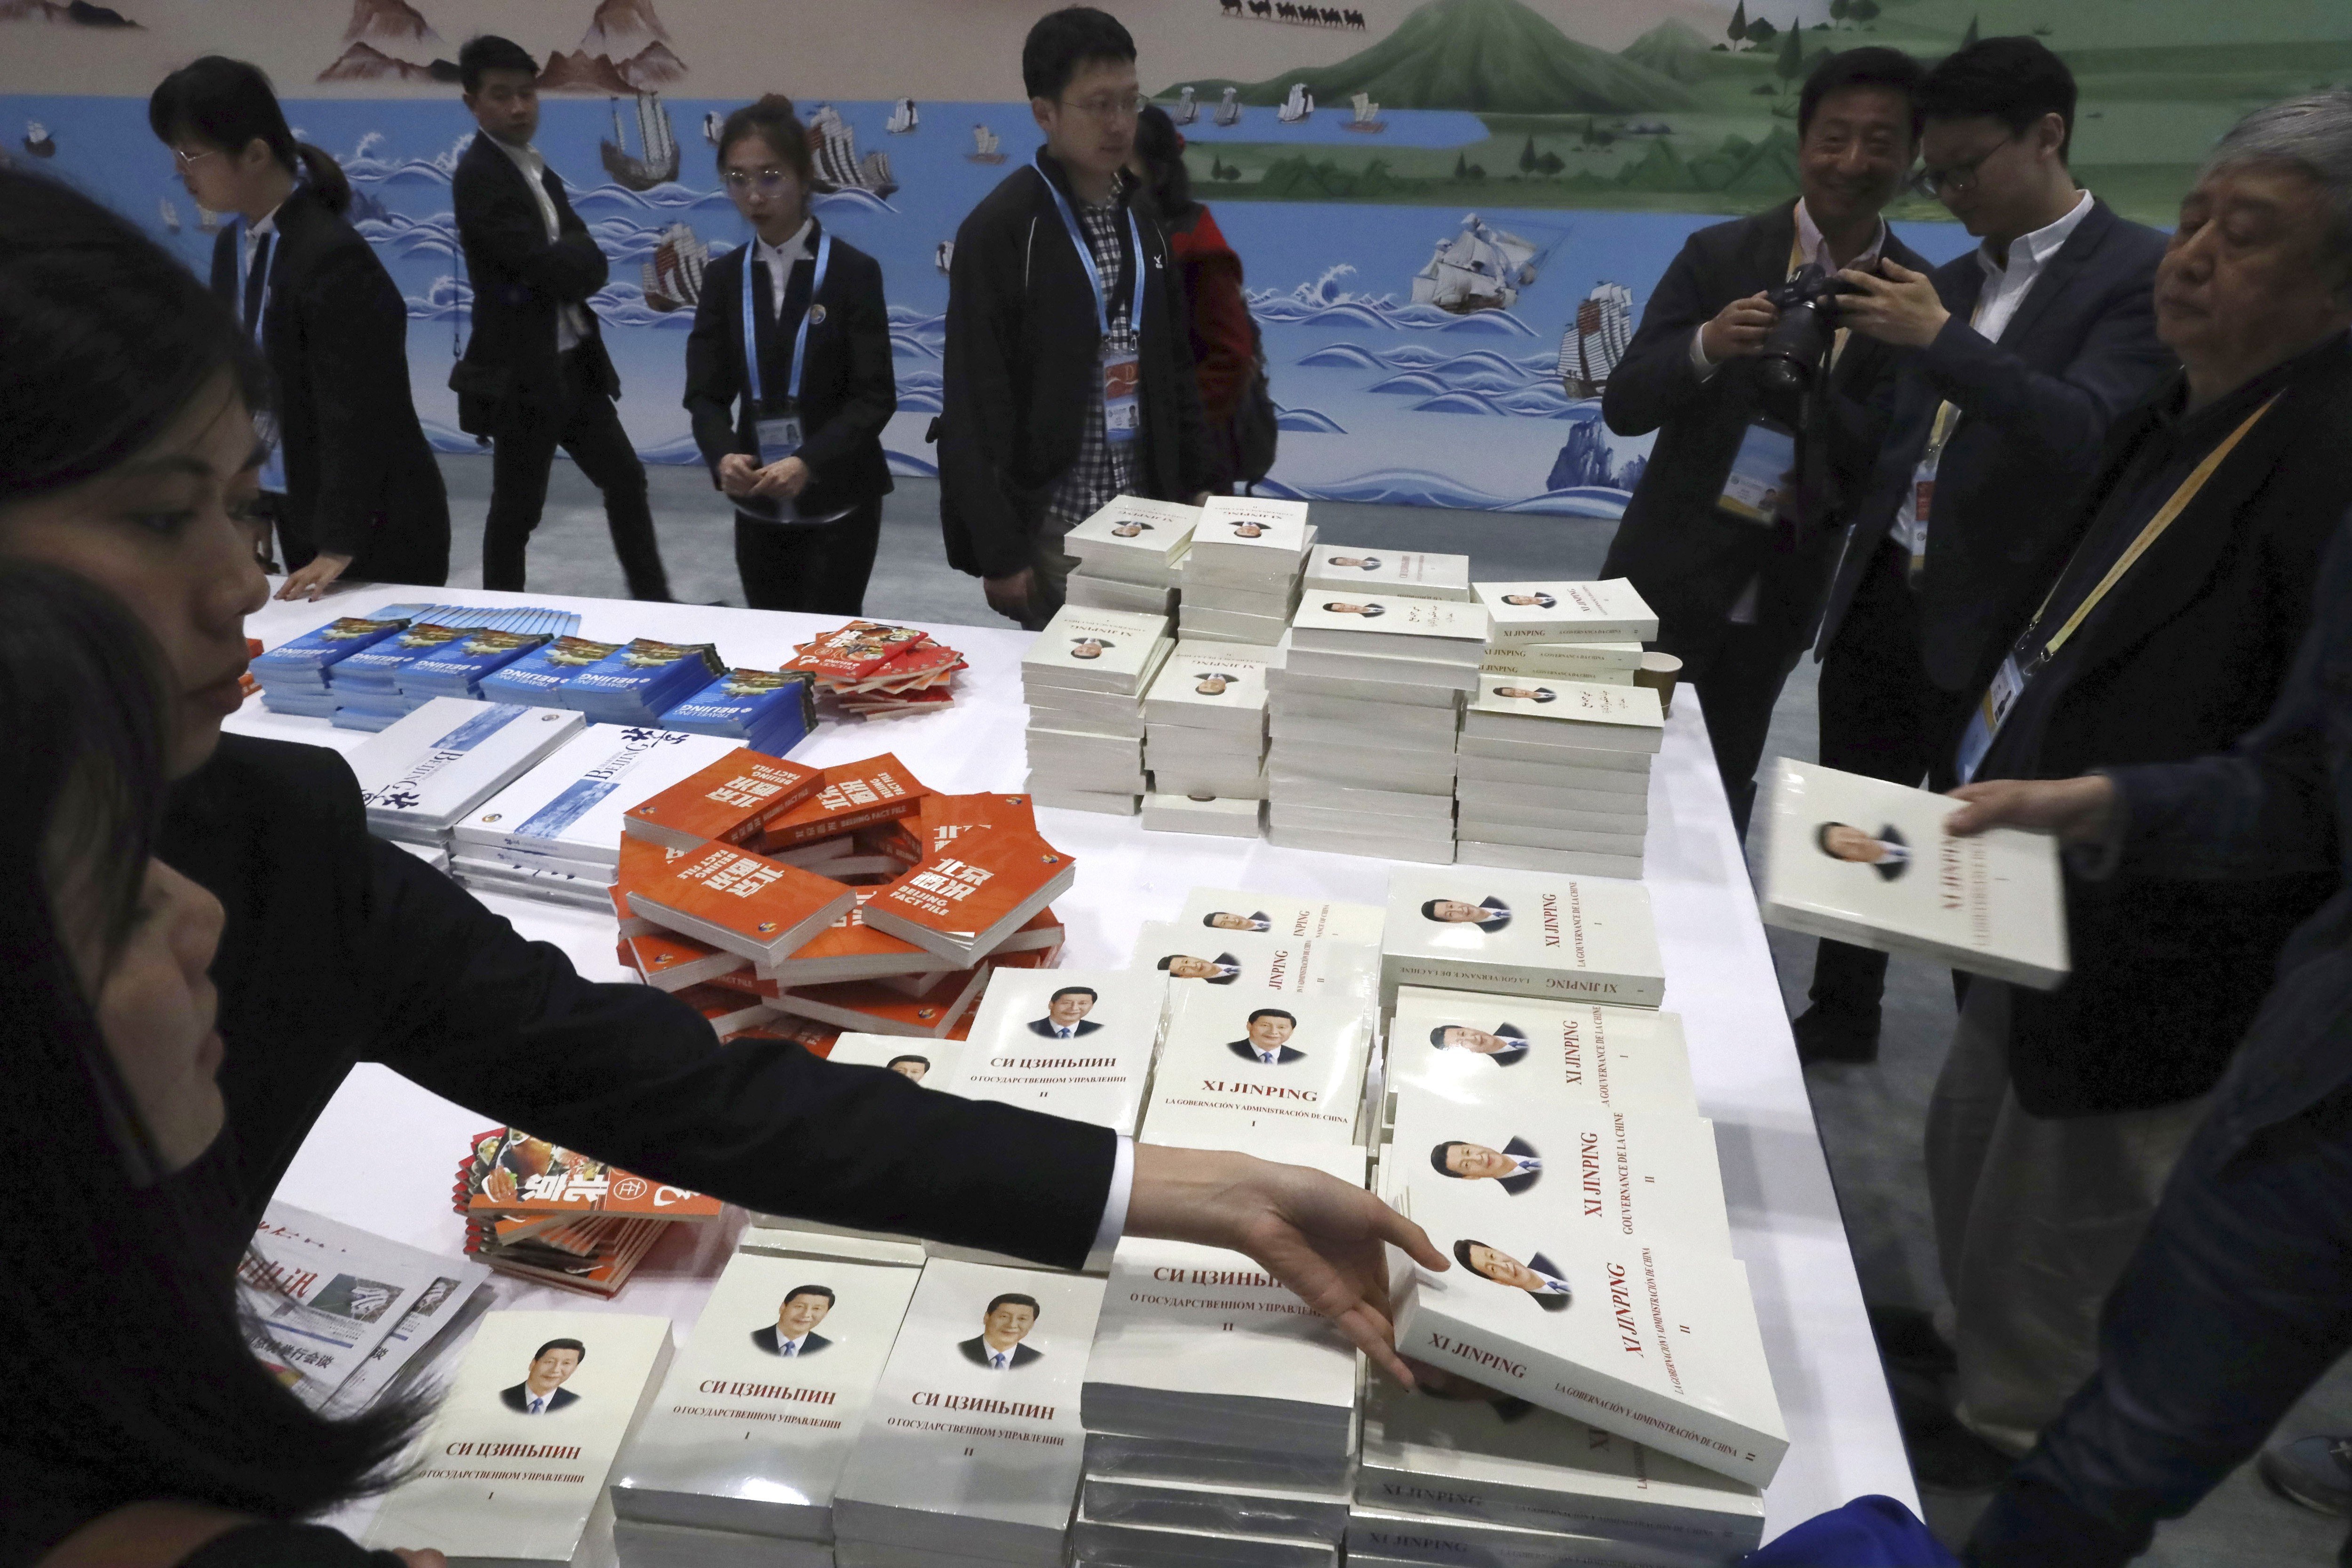 Attendees pick up copies of a book on President Xi Jinping’s governance at the forum’s media centre in Beijing on Friday. Photo: AP